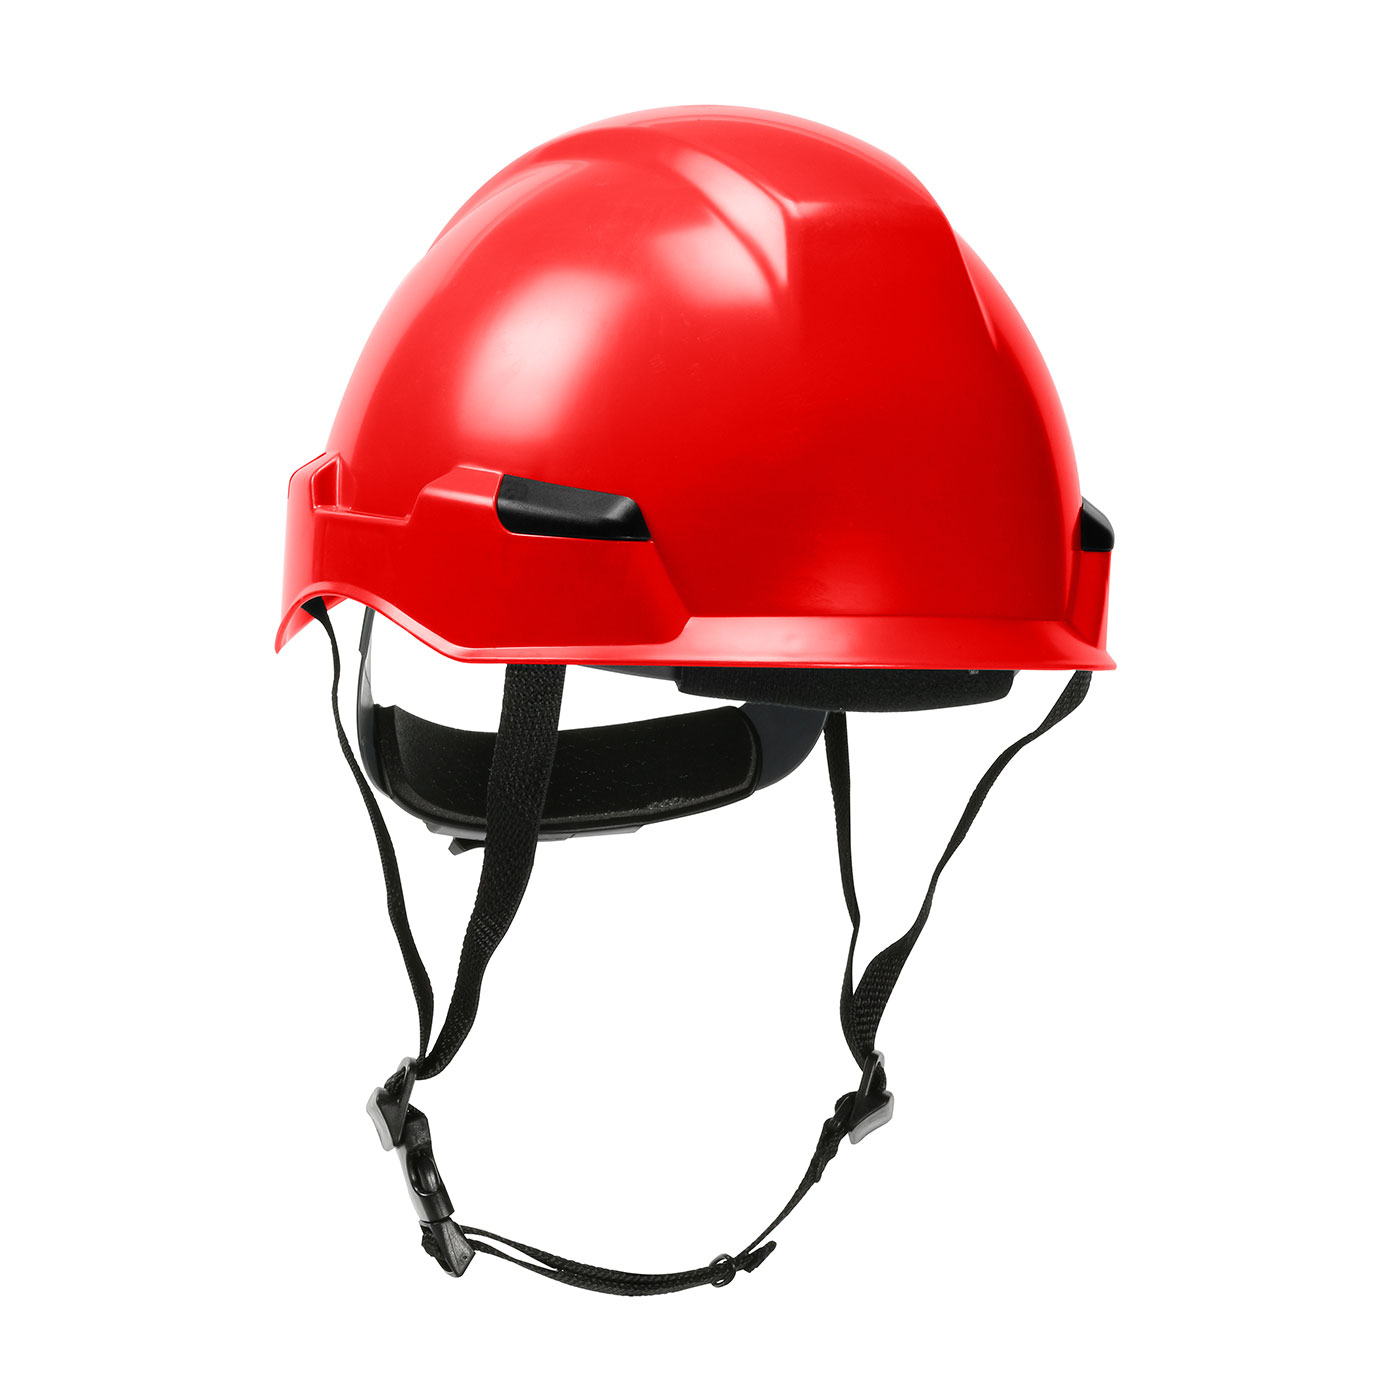 280-HP141R PIP® Dynamic Rocky™ Industrial Climbing Helmet with Polycarbonate / ABS Shell, Nylon Suspension, Wheel Ratchet Adjustment and 4-Point Chin Strap- Red